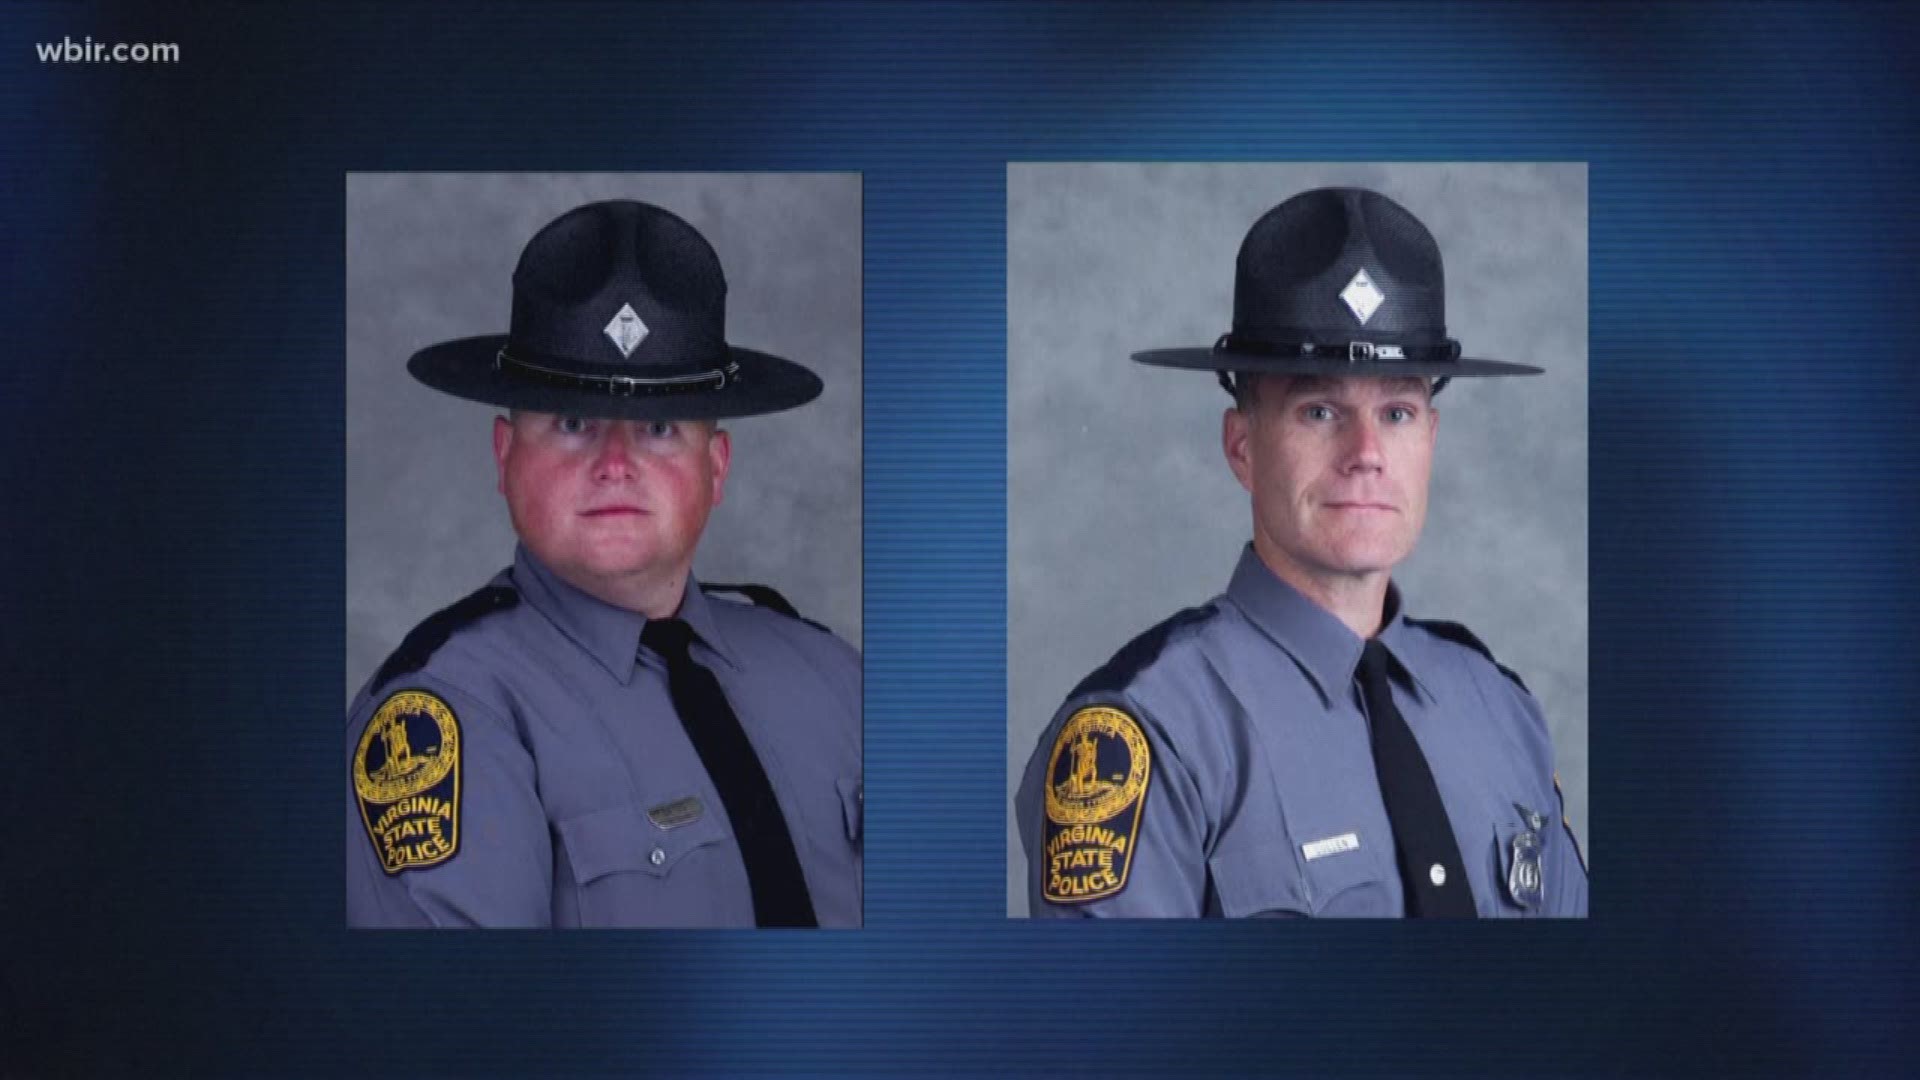 Trooper Berke Bates graduated from the University of Tennessee and lived in East Tennessee for much of his life.